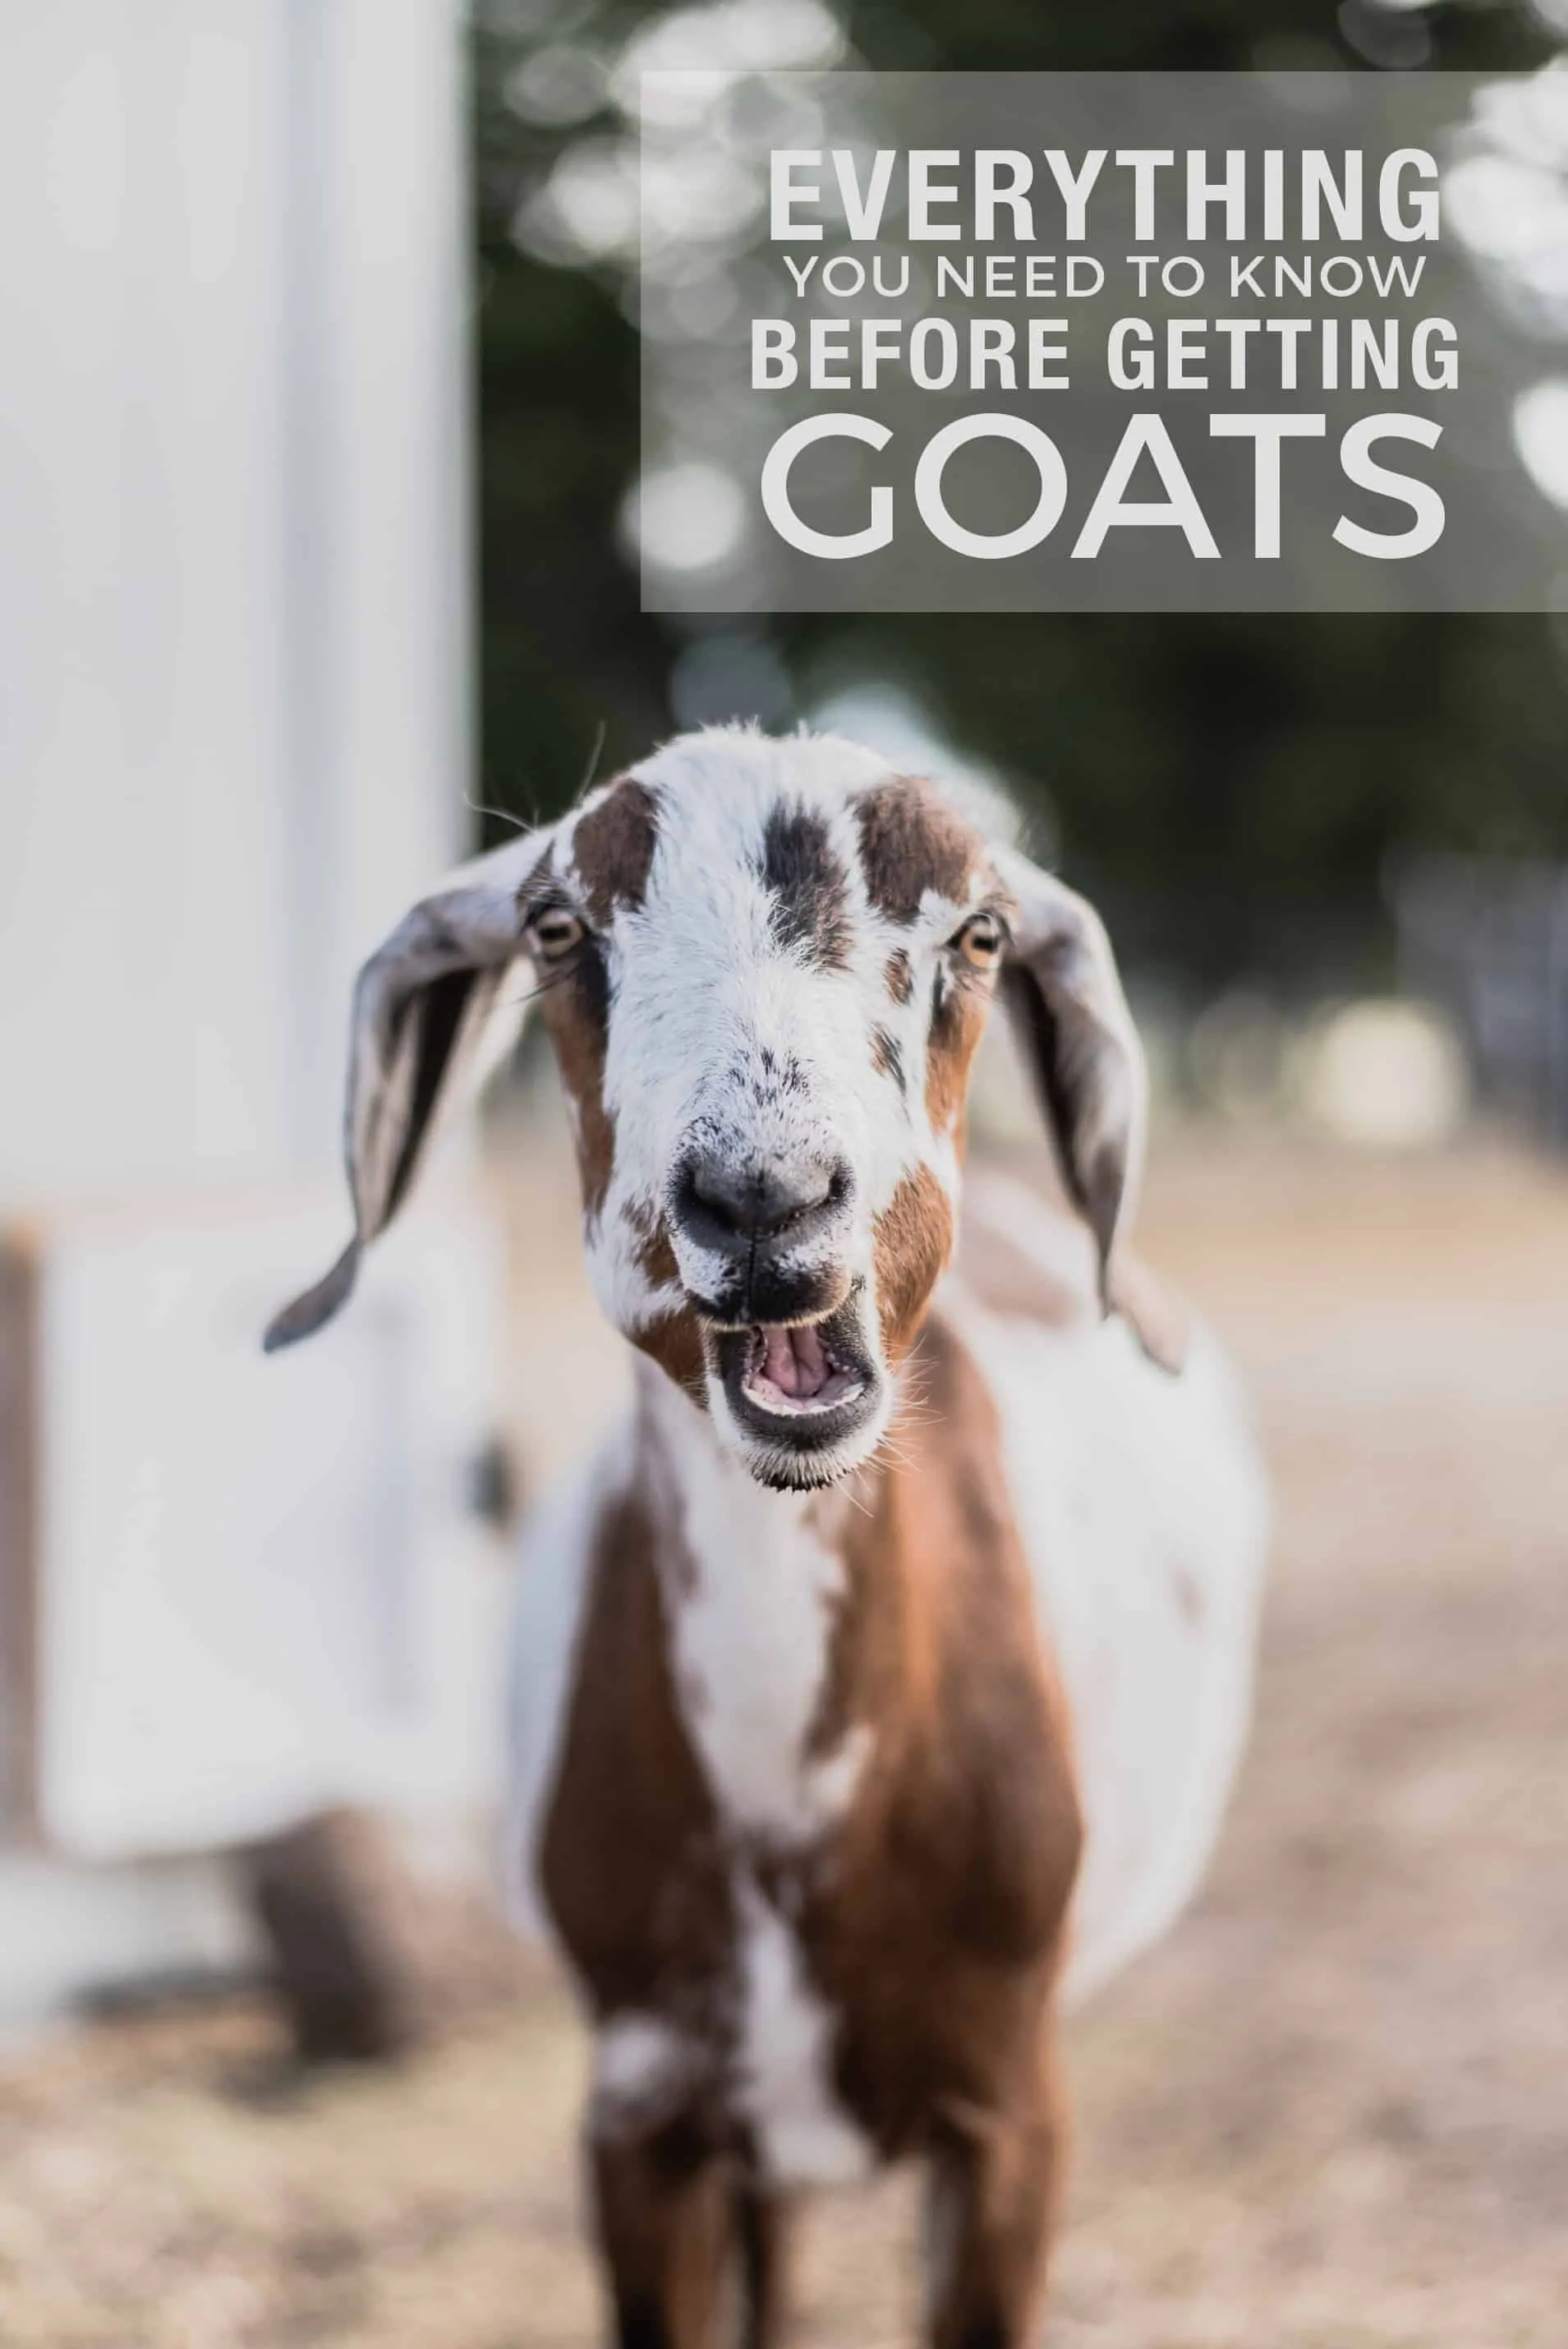 Caring for Goats: 15 Things I Wish I Knew Before Getting Goats